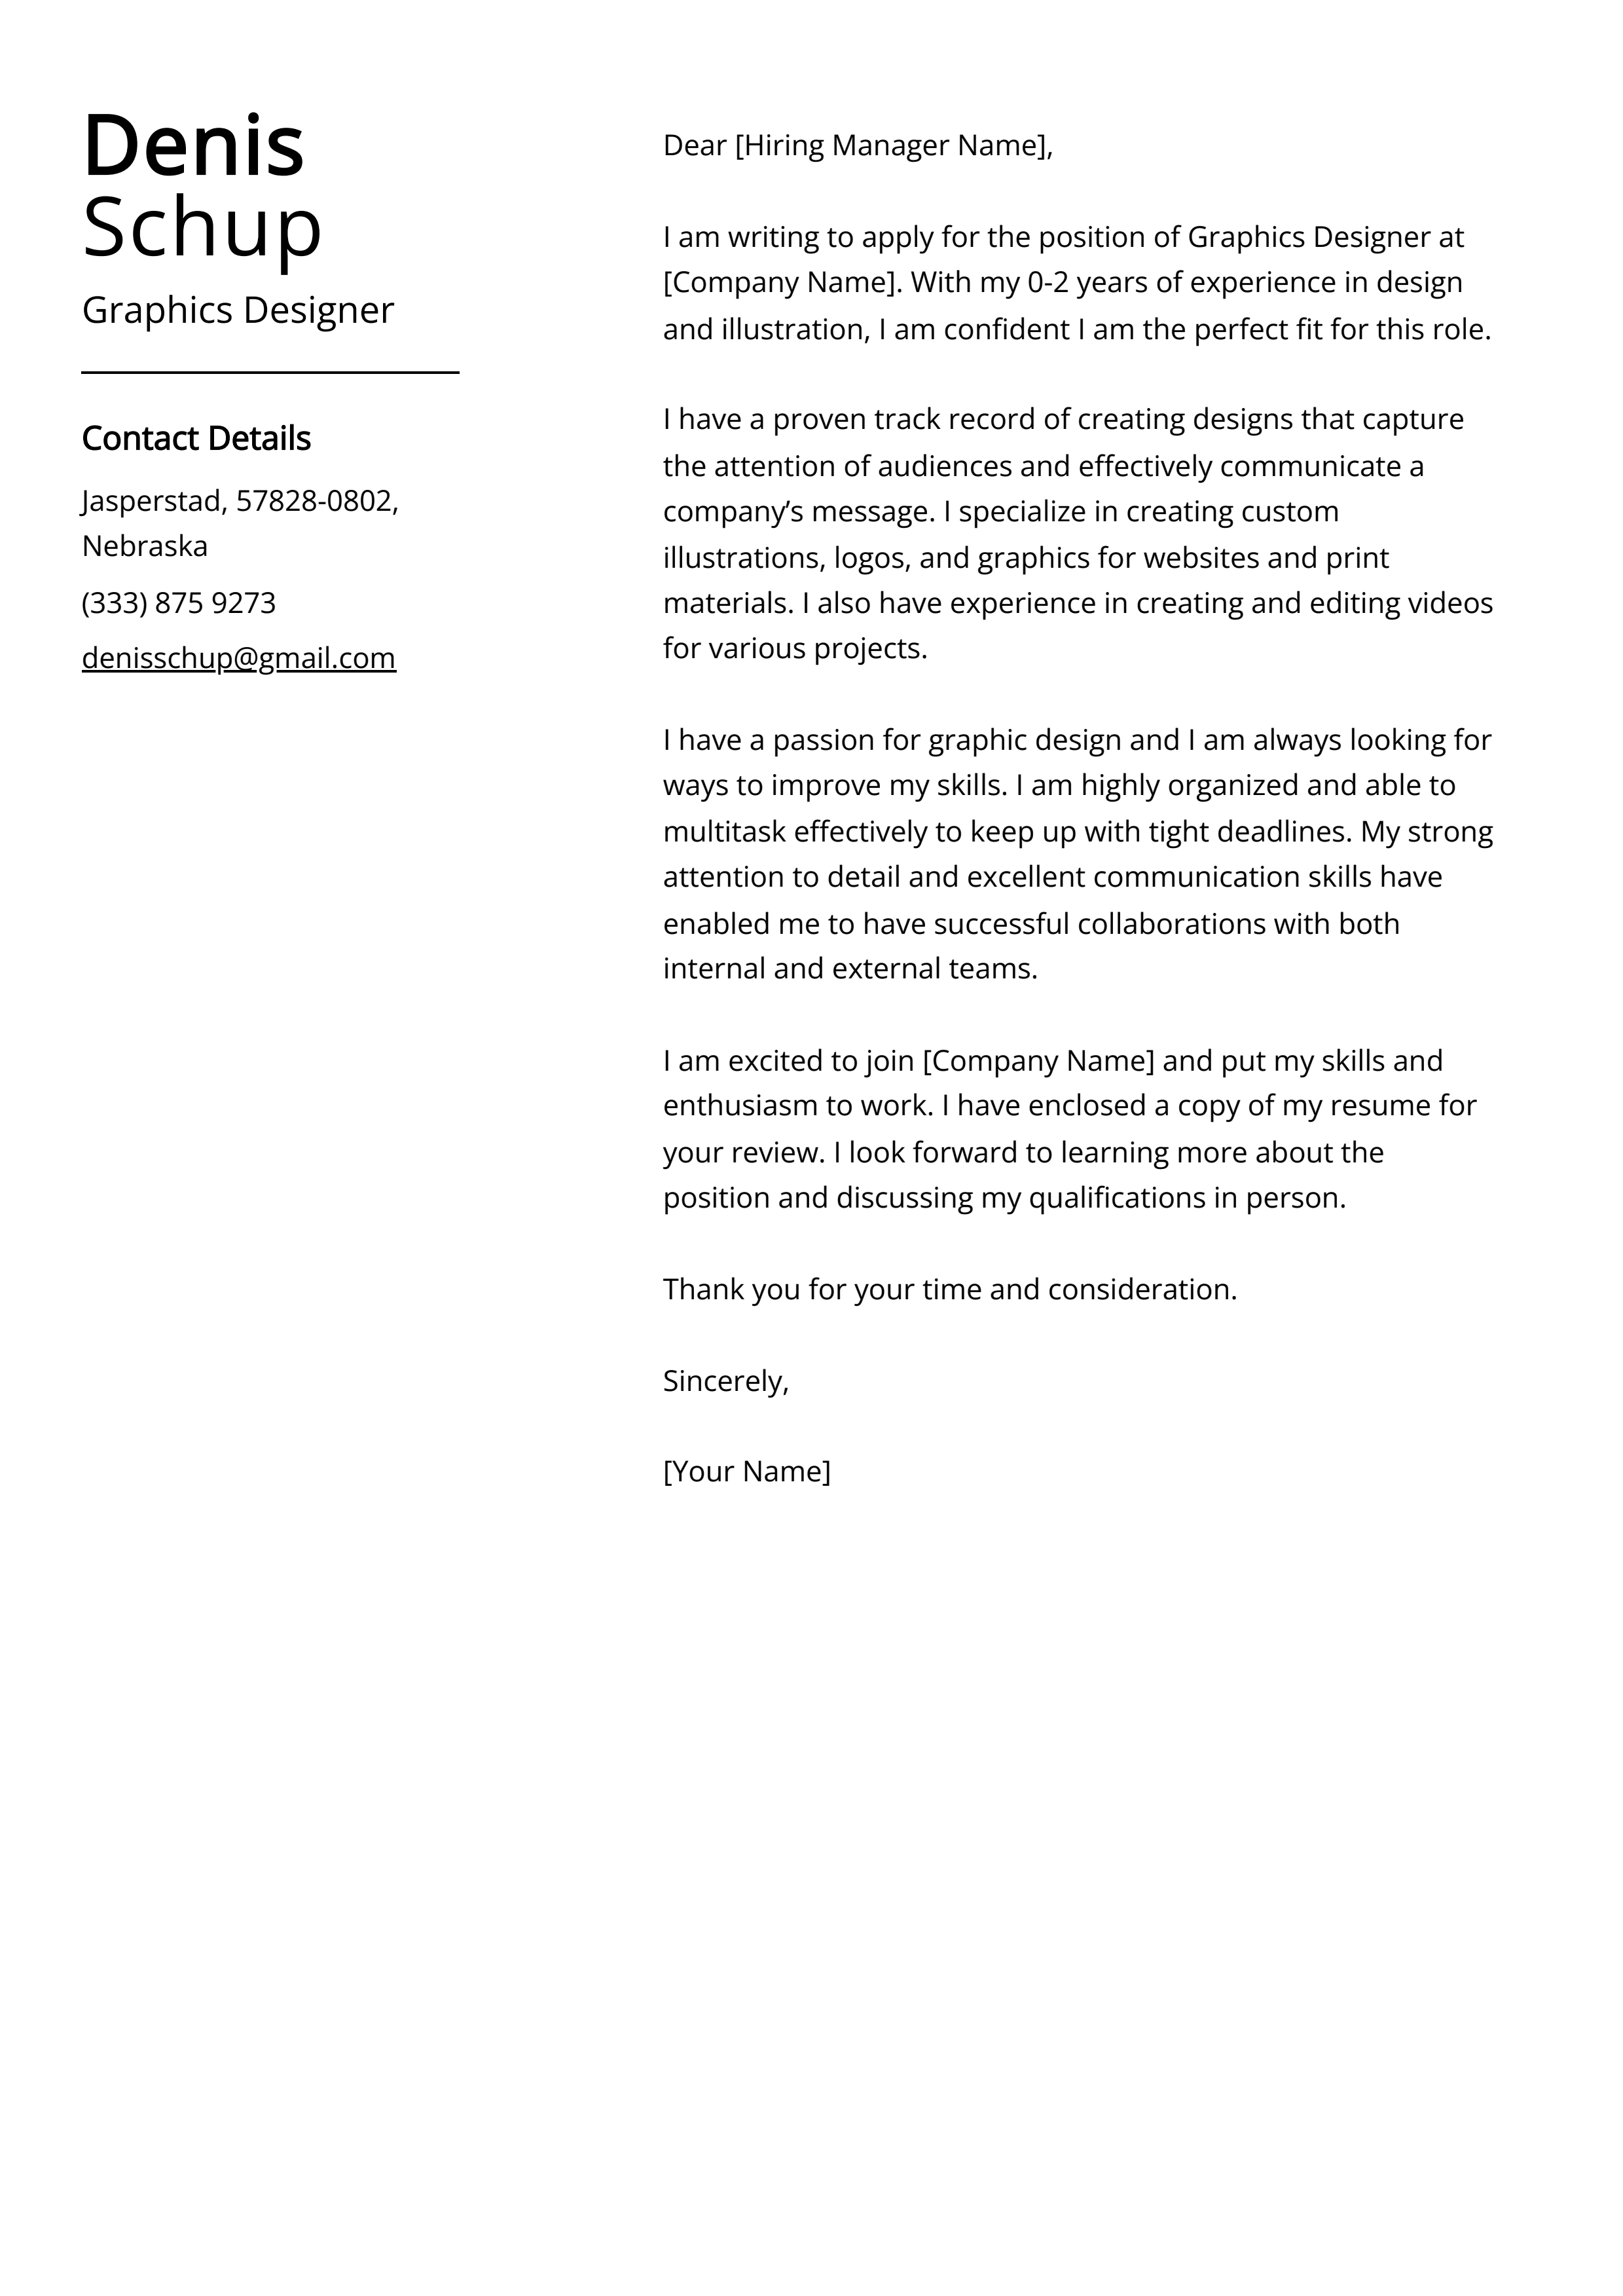 Graphics Designer Cover Letter Example